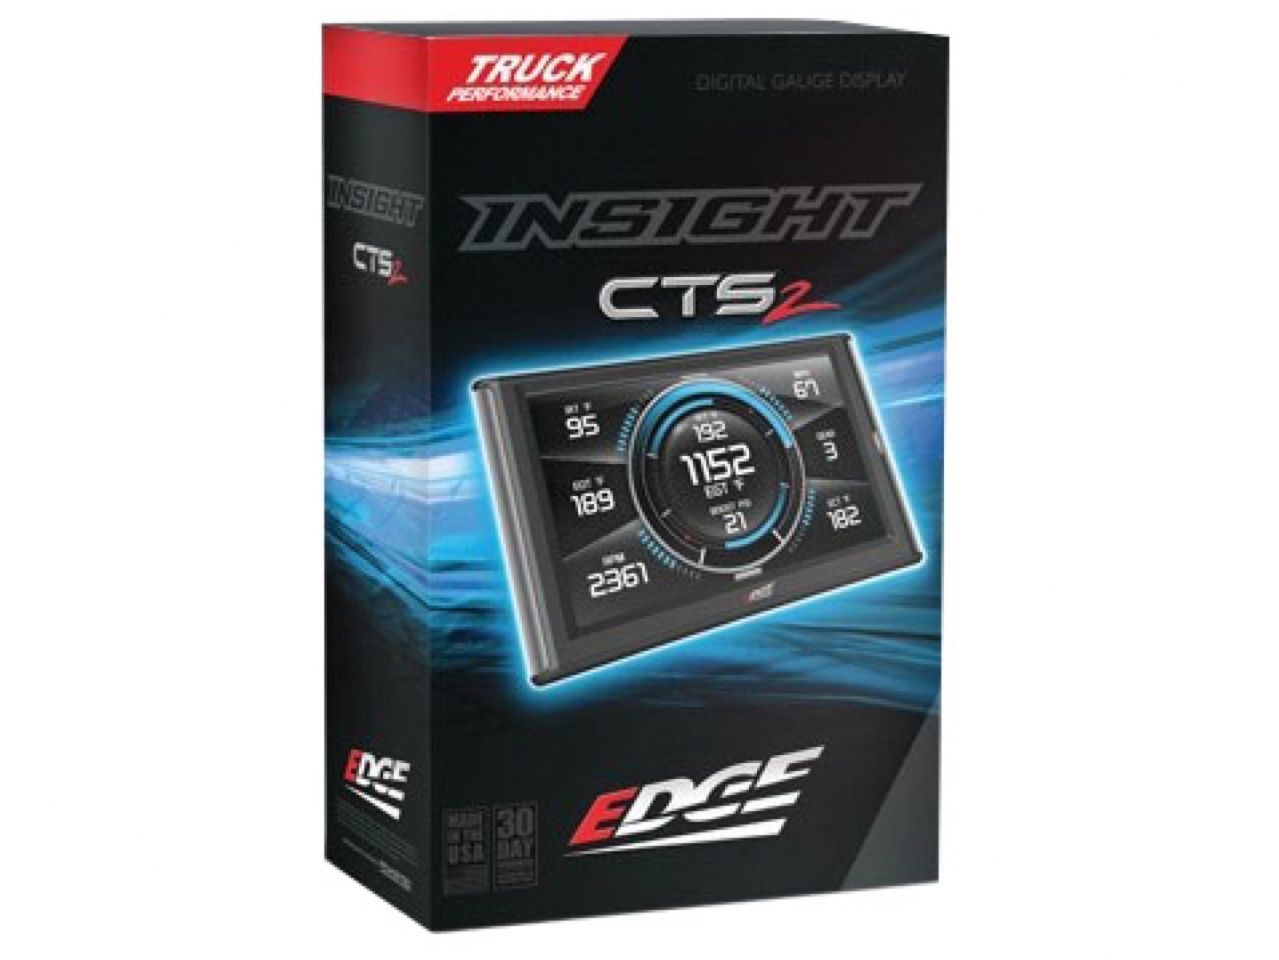 Edge Insight Cts2 Monitor (1996 & Newer Obdii Enabled Vehicle)